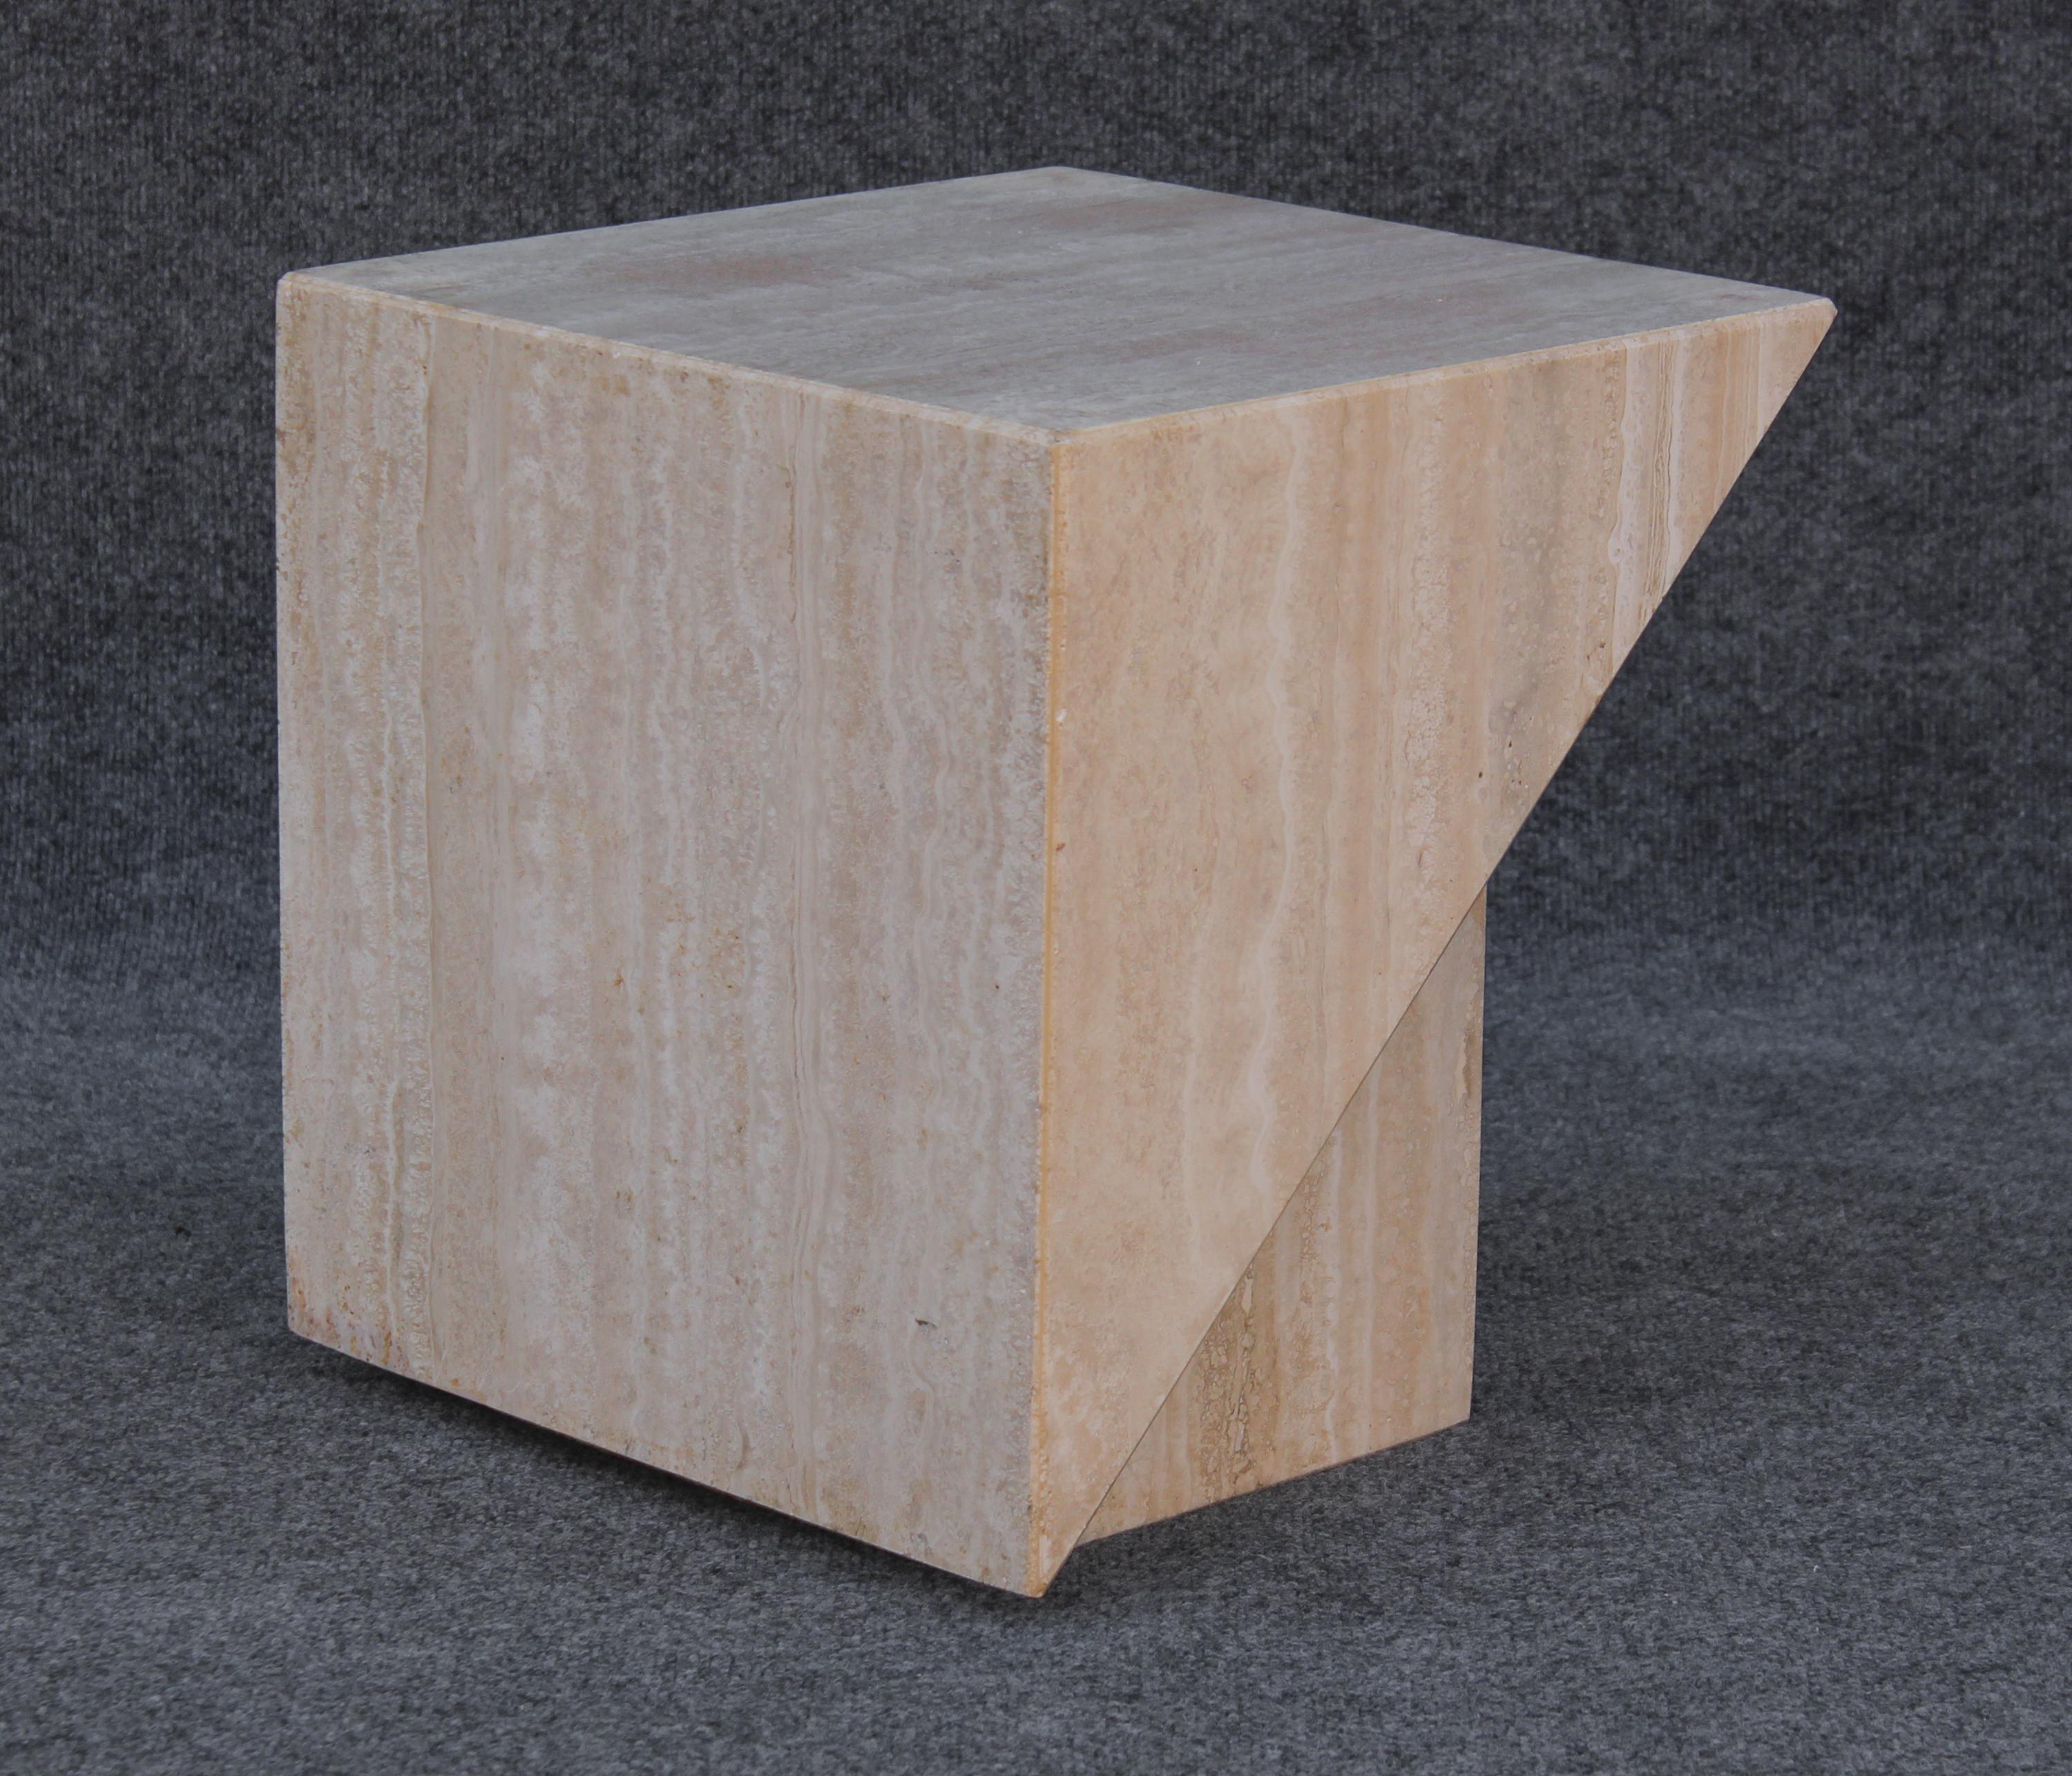 Midcentury Italian Post Modern Travertine Marble Cube Side Table or End Table For Sale 3